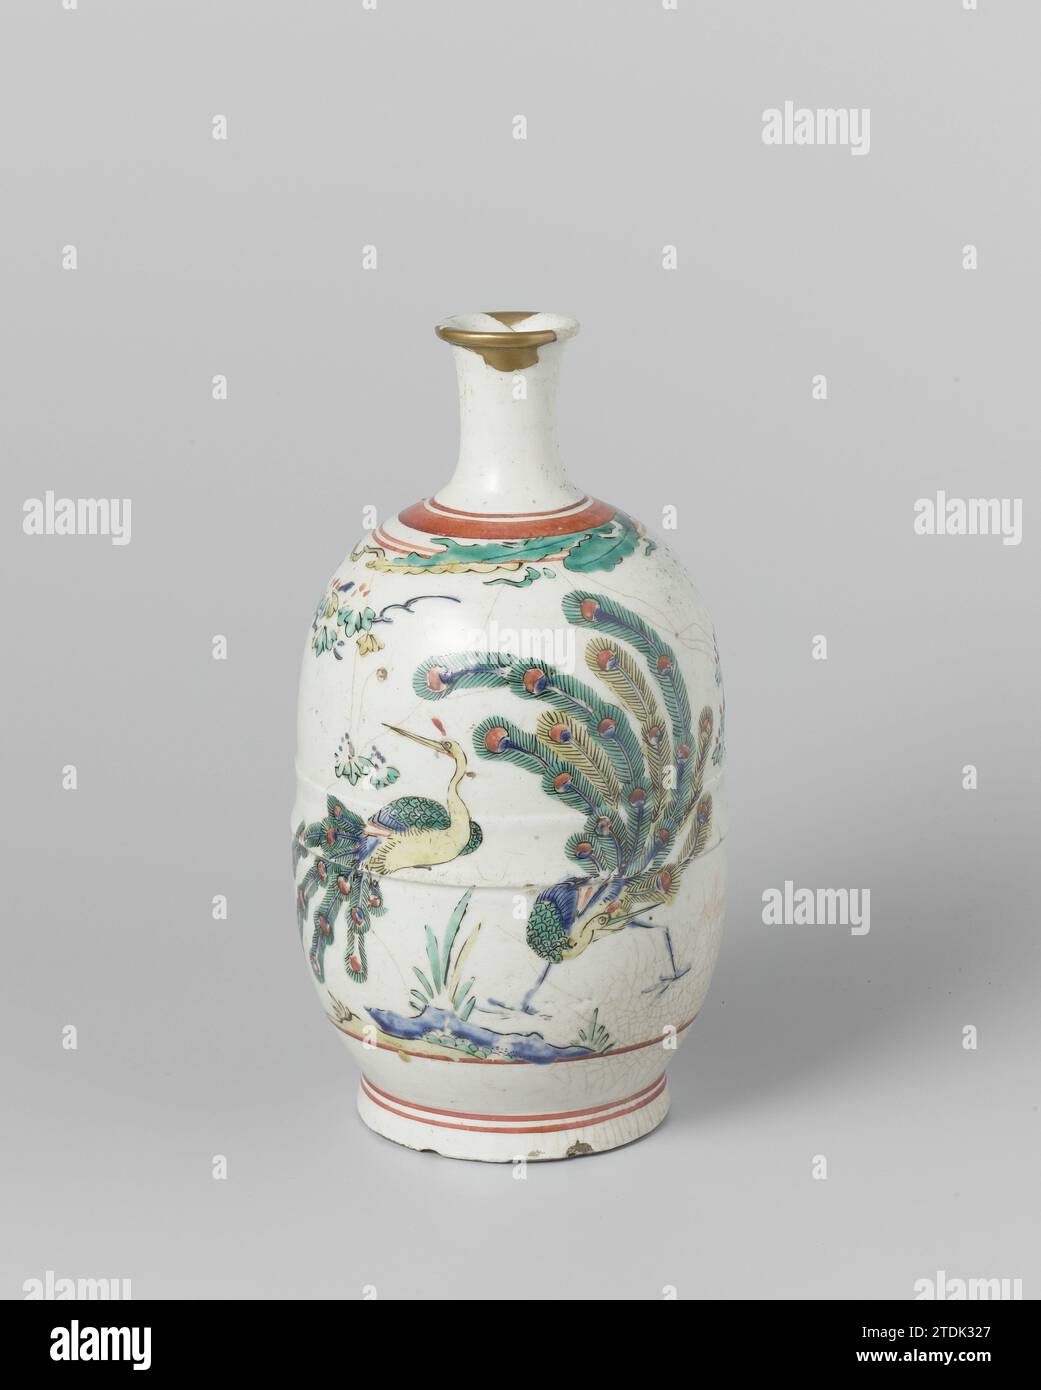 Sake bottle with two peacocks near a rock with a flowering plant, anonymous, c. 1660 - c. 1680 Bottle (sake bottle) of porcelain with a narrow, slightly spreading neck, painted on the glaze in blue, red, green, yellow and black. On the abdomen twice a peacock with a rock with a flowering plant. Leaves and red lines on the shoulder. Gold paint repair in the edge. Arita (Kakiemon style). Japan porcelain. glaze. painting / vitrification Bottle (sake bottle) of porcelain with a narrow, slightly spreading neck, painted on the glaze in blue, red, green, yellow and black. On the abdomen twice a peaco Stock Photo